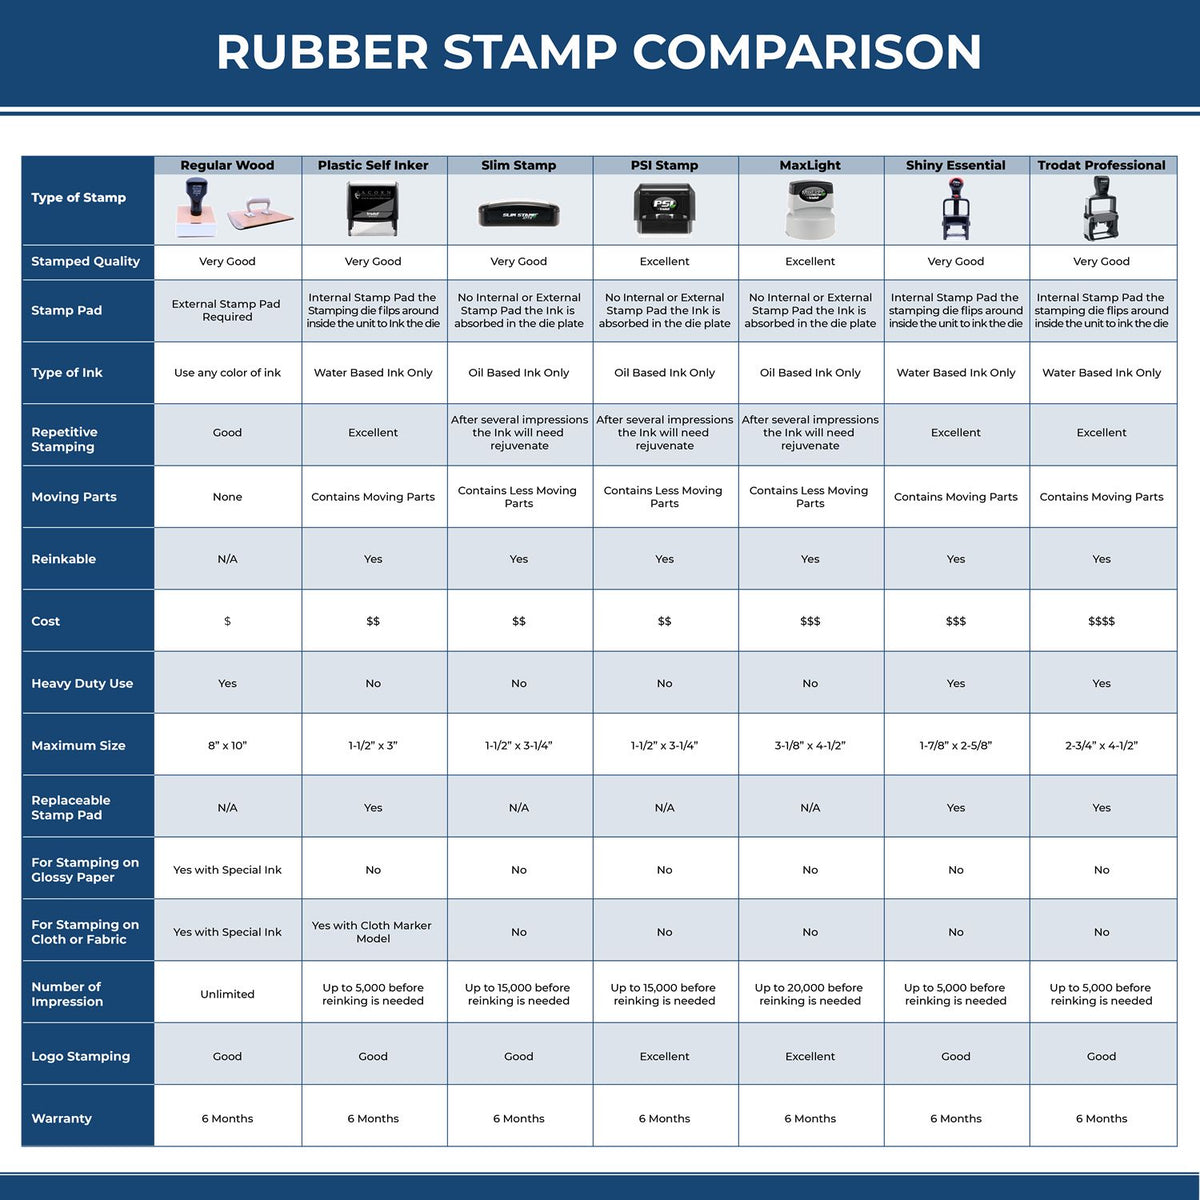 Please Forward Attending Physicians Insurance Form 4941R Rubber Stamp Comparison